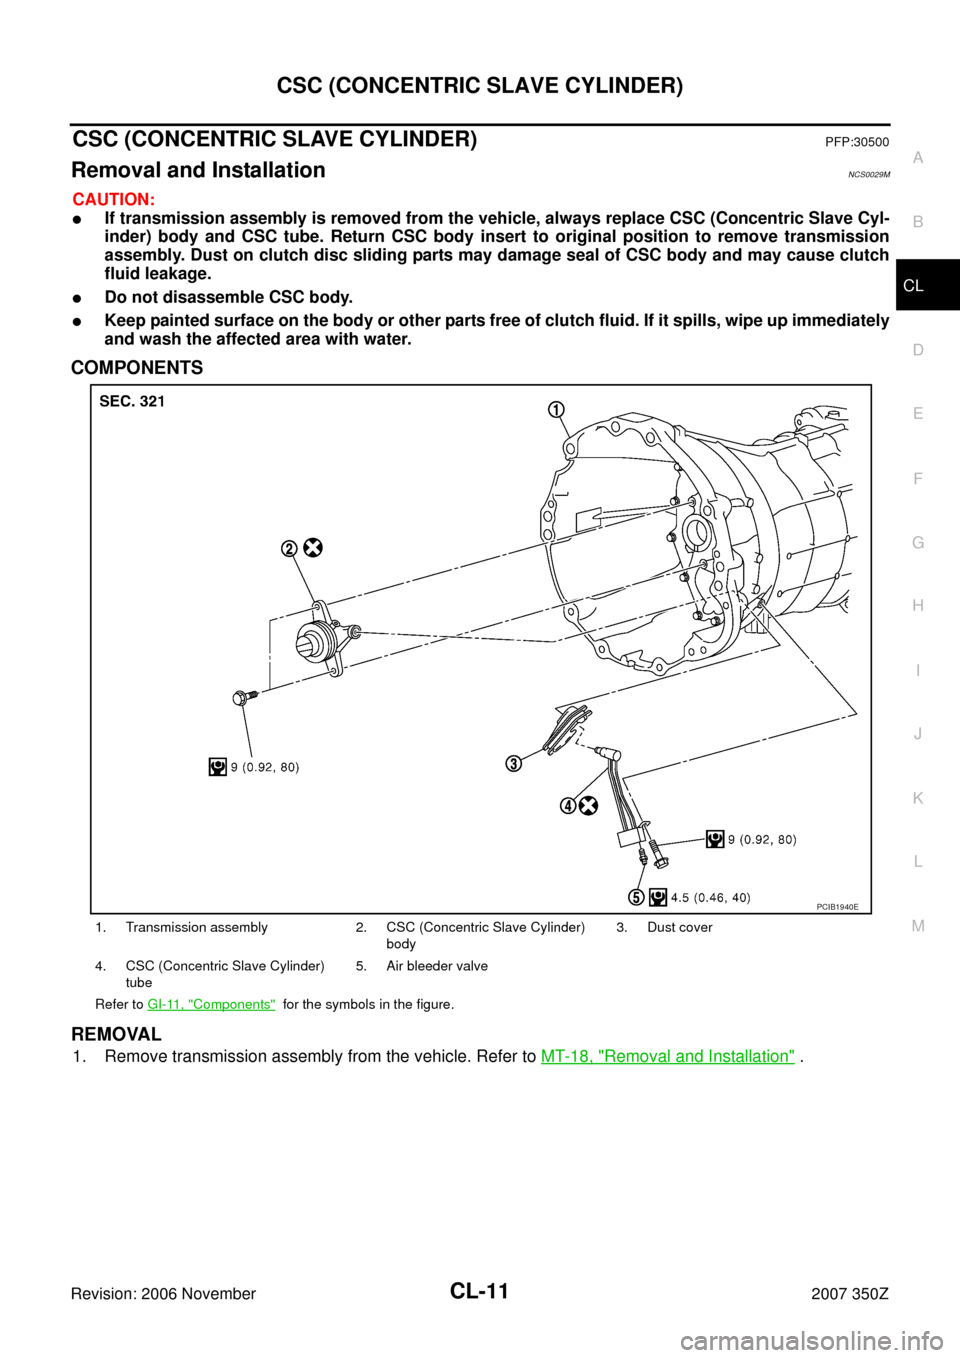 NISSAN 350Z 2007 Z33 Clutch User Guide CSC (CONCENTRIC SLAVE CYLINDER)
CL-11
D
E
F
G
H
I
J
K
L
MA
B
CL
Revision: 2006 November2007 350Z
CSC (CONCENTRIC SLAVE CYLINDER)PFP:30500
Removal and InstallationNCS0029M
CAUTION:
If transmission ass